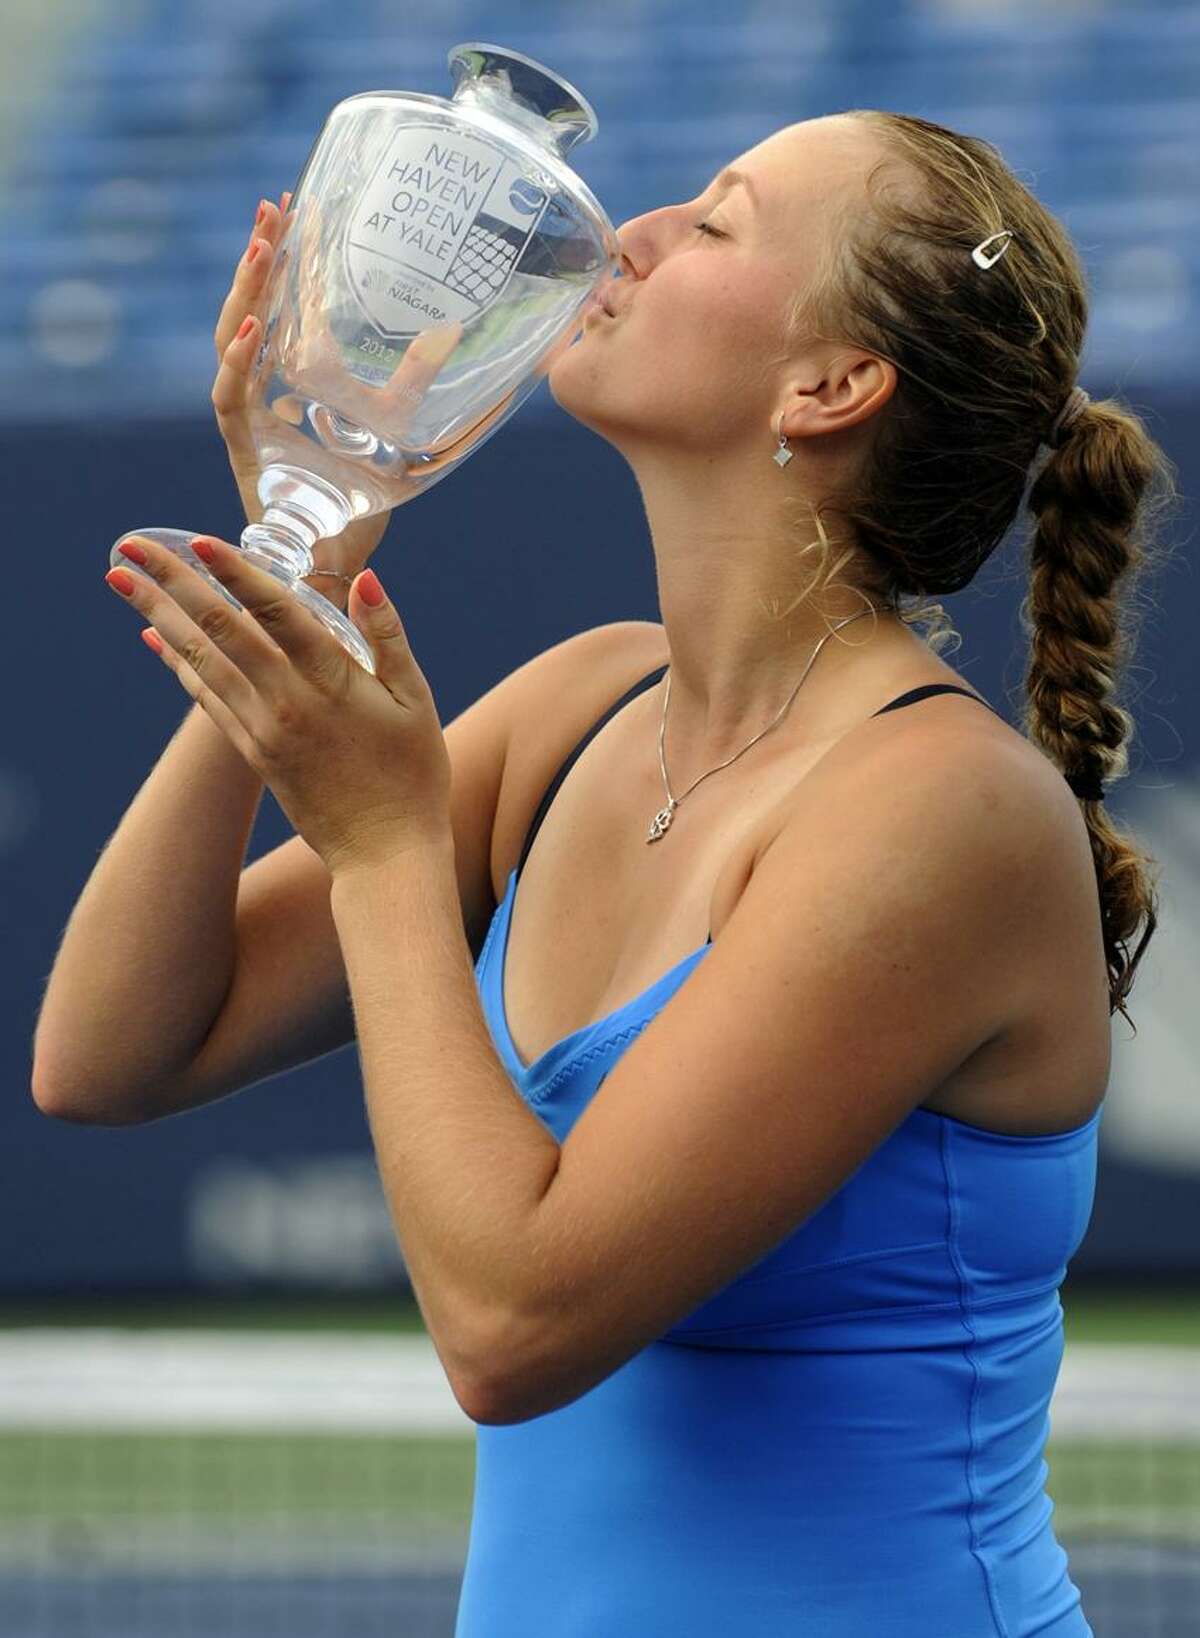 Petra Kvitova of the Czech Republic celebrates by kissing her trophy after she defeats Maria Kirilenko of Russia in two sets 7-6, 7-5 during 2012 New Haven Open at Yale WTA tennis tournament championship August 25, 2012. Photo by Bob Child / for the New Haven Register